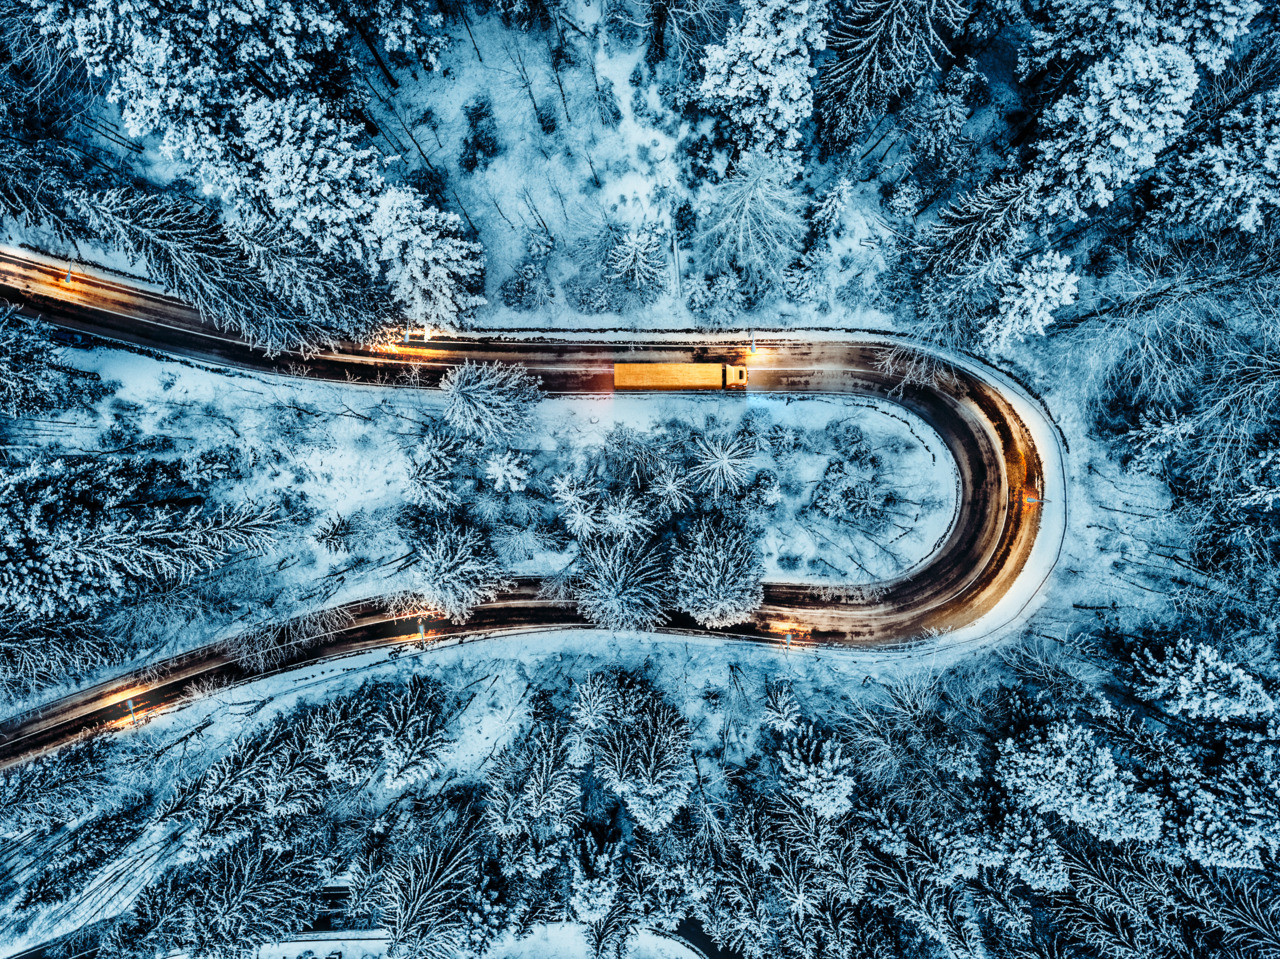 White car passing on an extreme winding road in wintertime